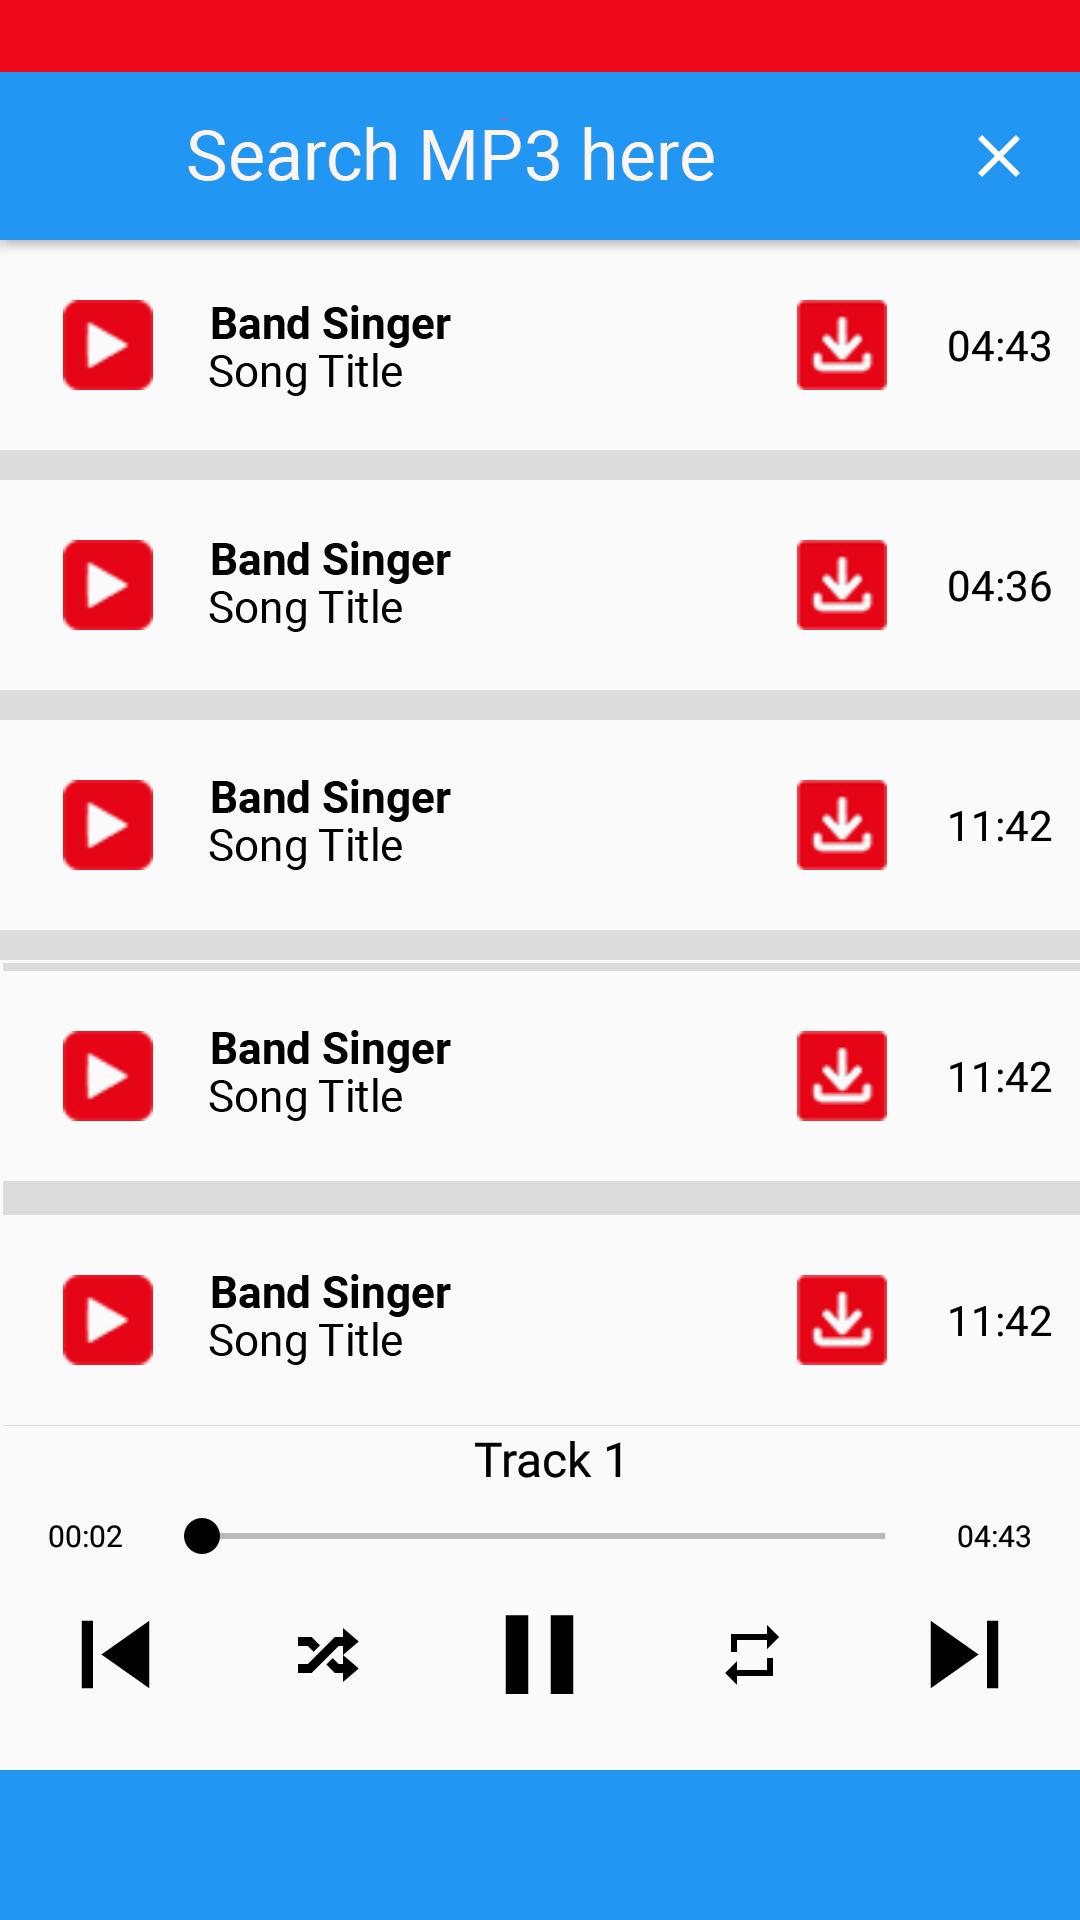 MP3 Downloader Music Free 2020 for Android - APK Download